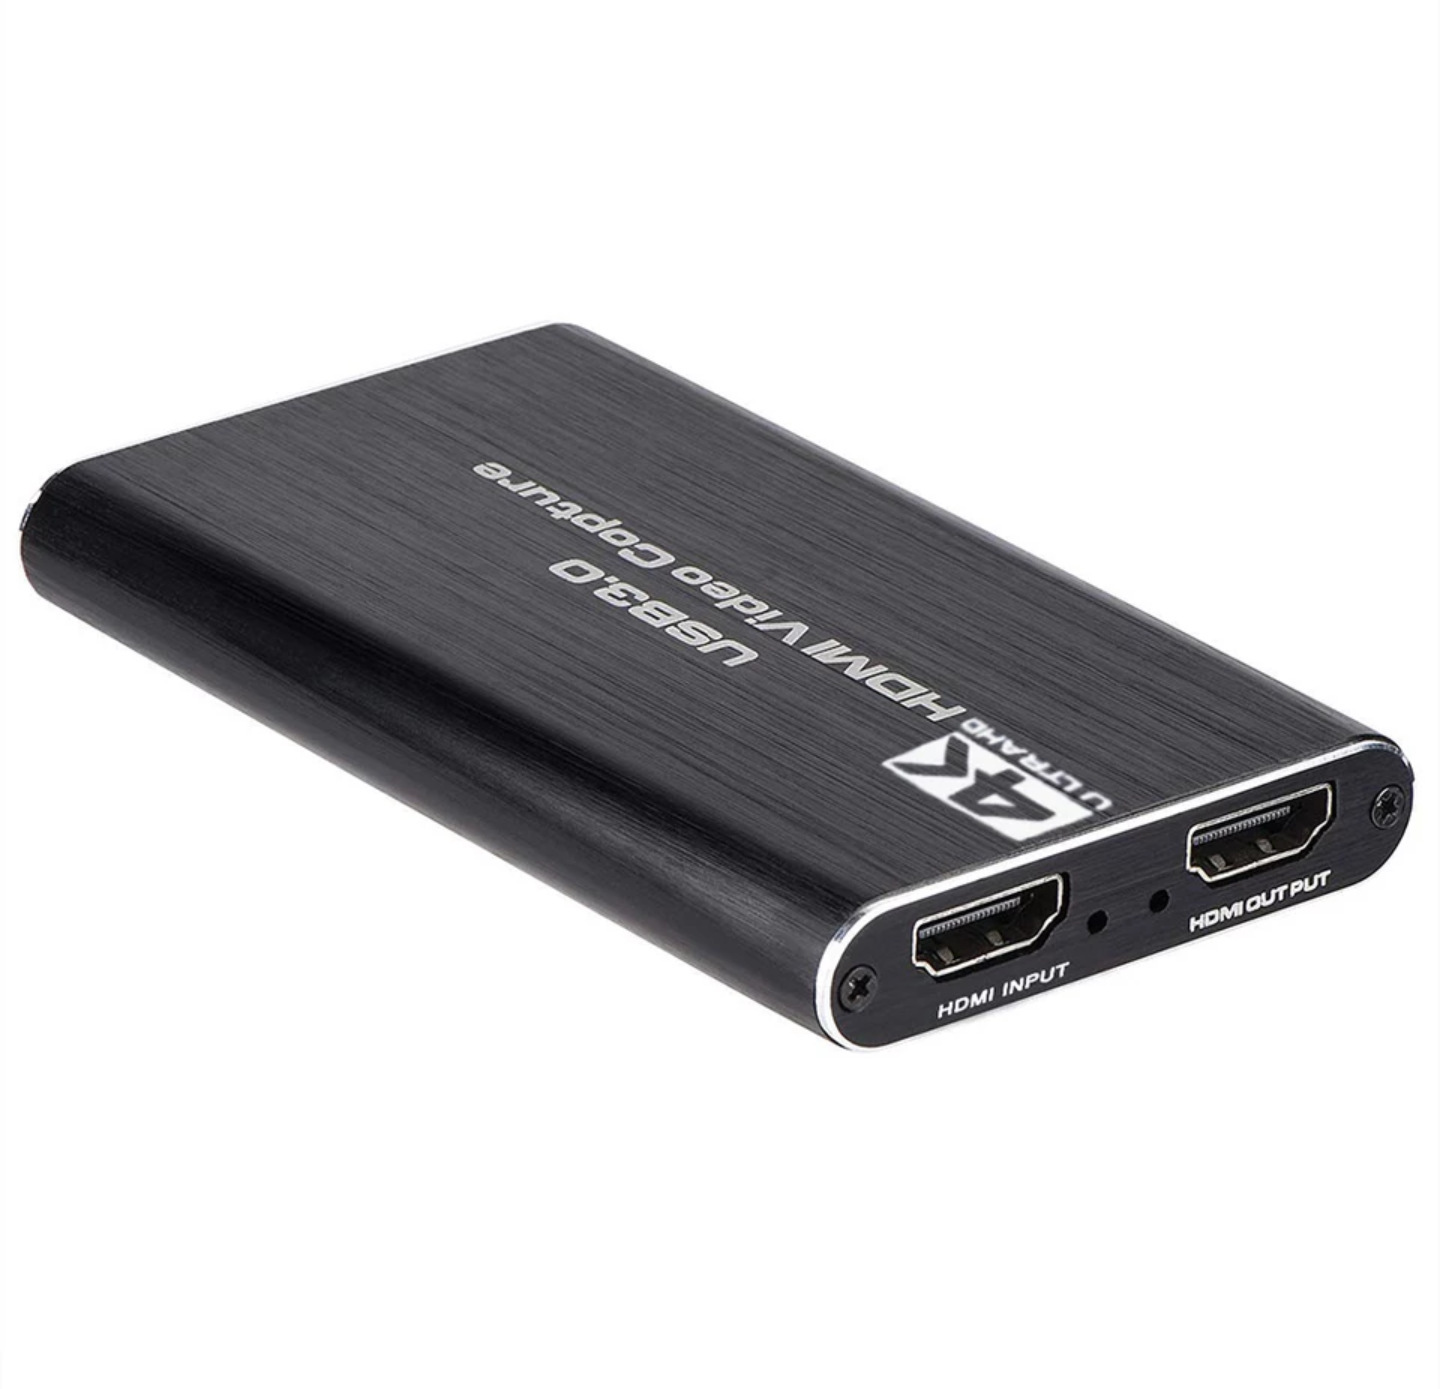 Loop Out USB 3.0 Audio Video Recorder For Game Video Conference Live Streaming